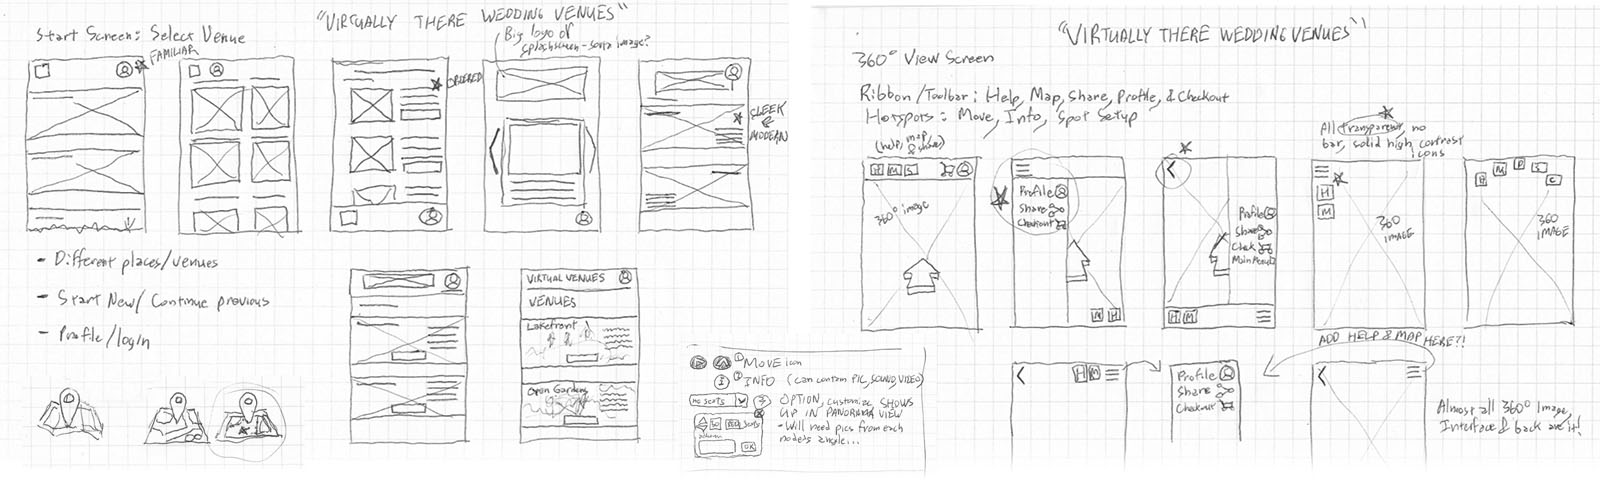 Image of Rough Sketches of the interface